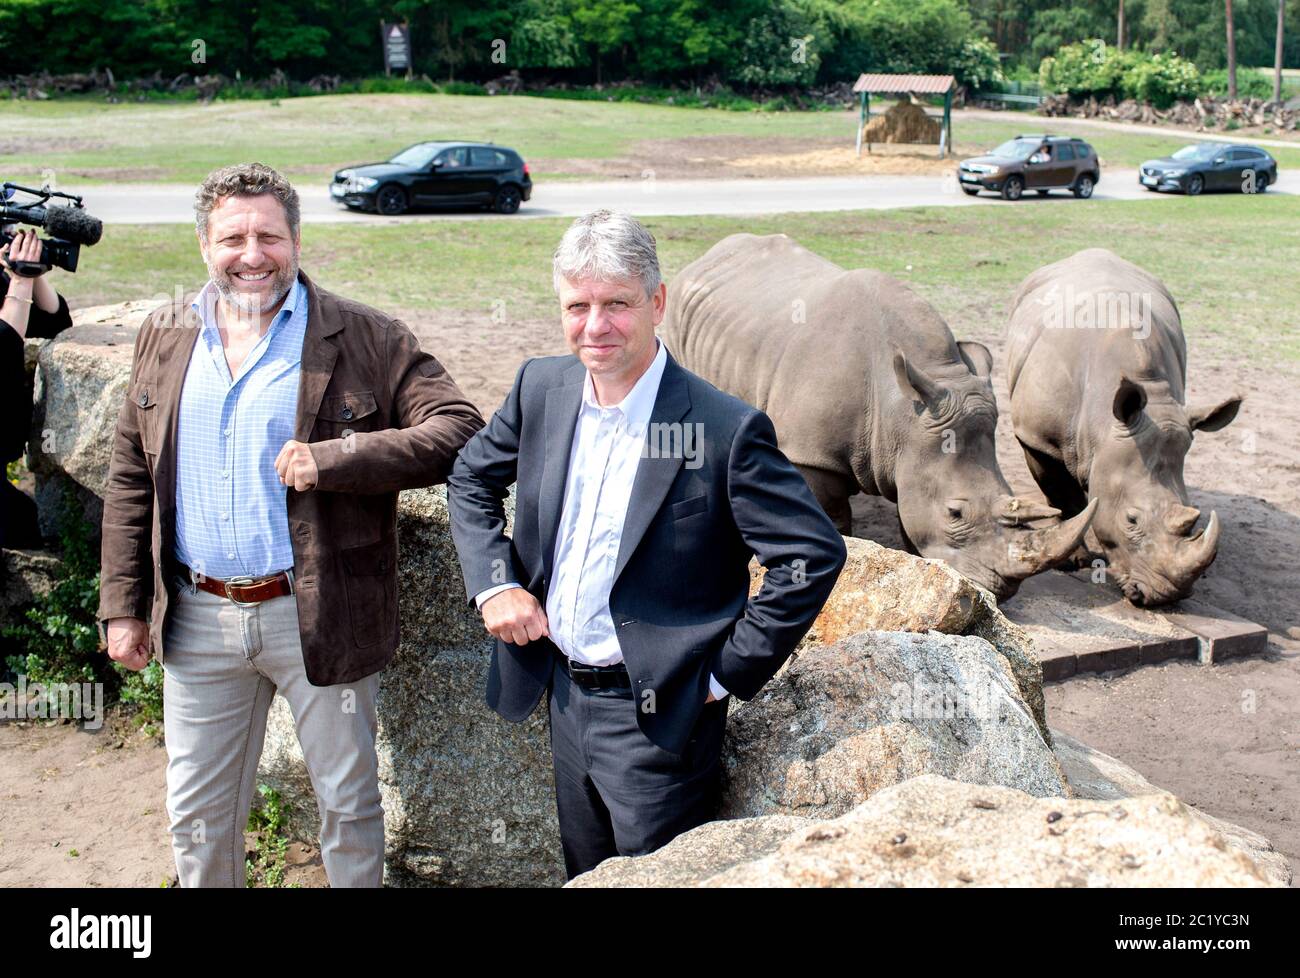 Hodenhagen, Germany. 16th June, 2020. Fabrizio Sepe (l), Managing Director Serengeti-Park, and Thomas Hildebrandt, Professor at the Leibniz Institute for Zoo and Wildlife Research, are standing in front of a pasture in Serengeti-Park where the southern white rhinos of the zoo live. The northern white rhino, which is on the verge of extinction, is to be saved with support from Lower Saxony. The Serengeti-Park Hodenhagen in the Lüneburg Heath is participating in an international project of the Leibniz Institute for Zoo and Wildlife Research. Credit: Hauke-Christian Dittrich/dpa/Alamy Live News Stock Photo